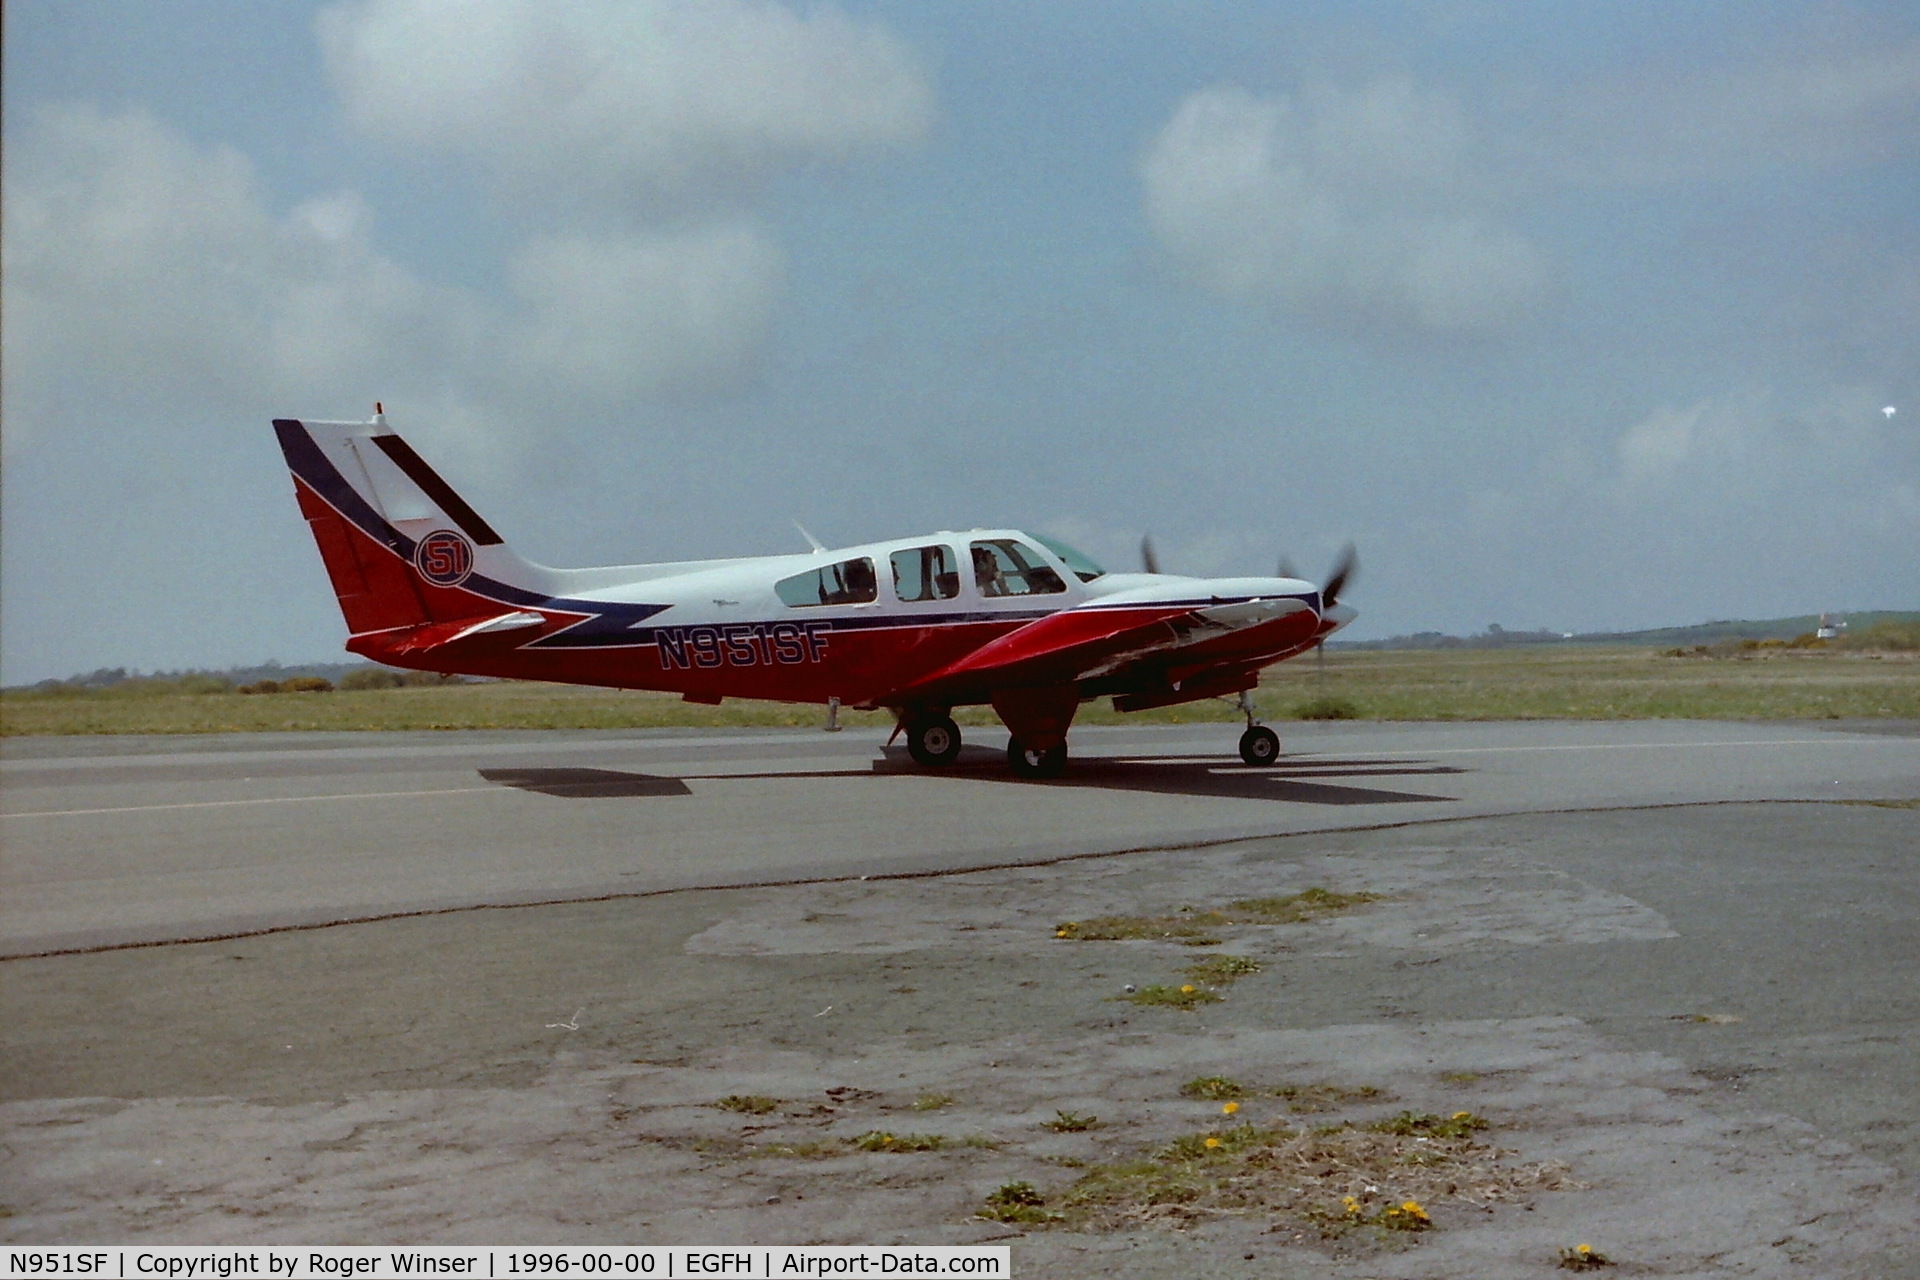 N951SF, 1969 Beech 56TC Turbo Baron C/N TG-83, Beech Turbo Baron carrying race number 51 at Swansea Airport in 1996